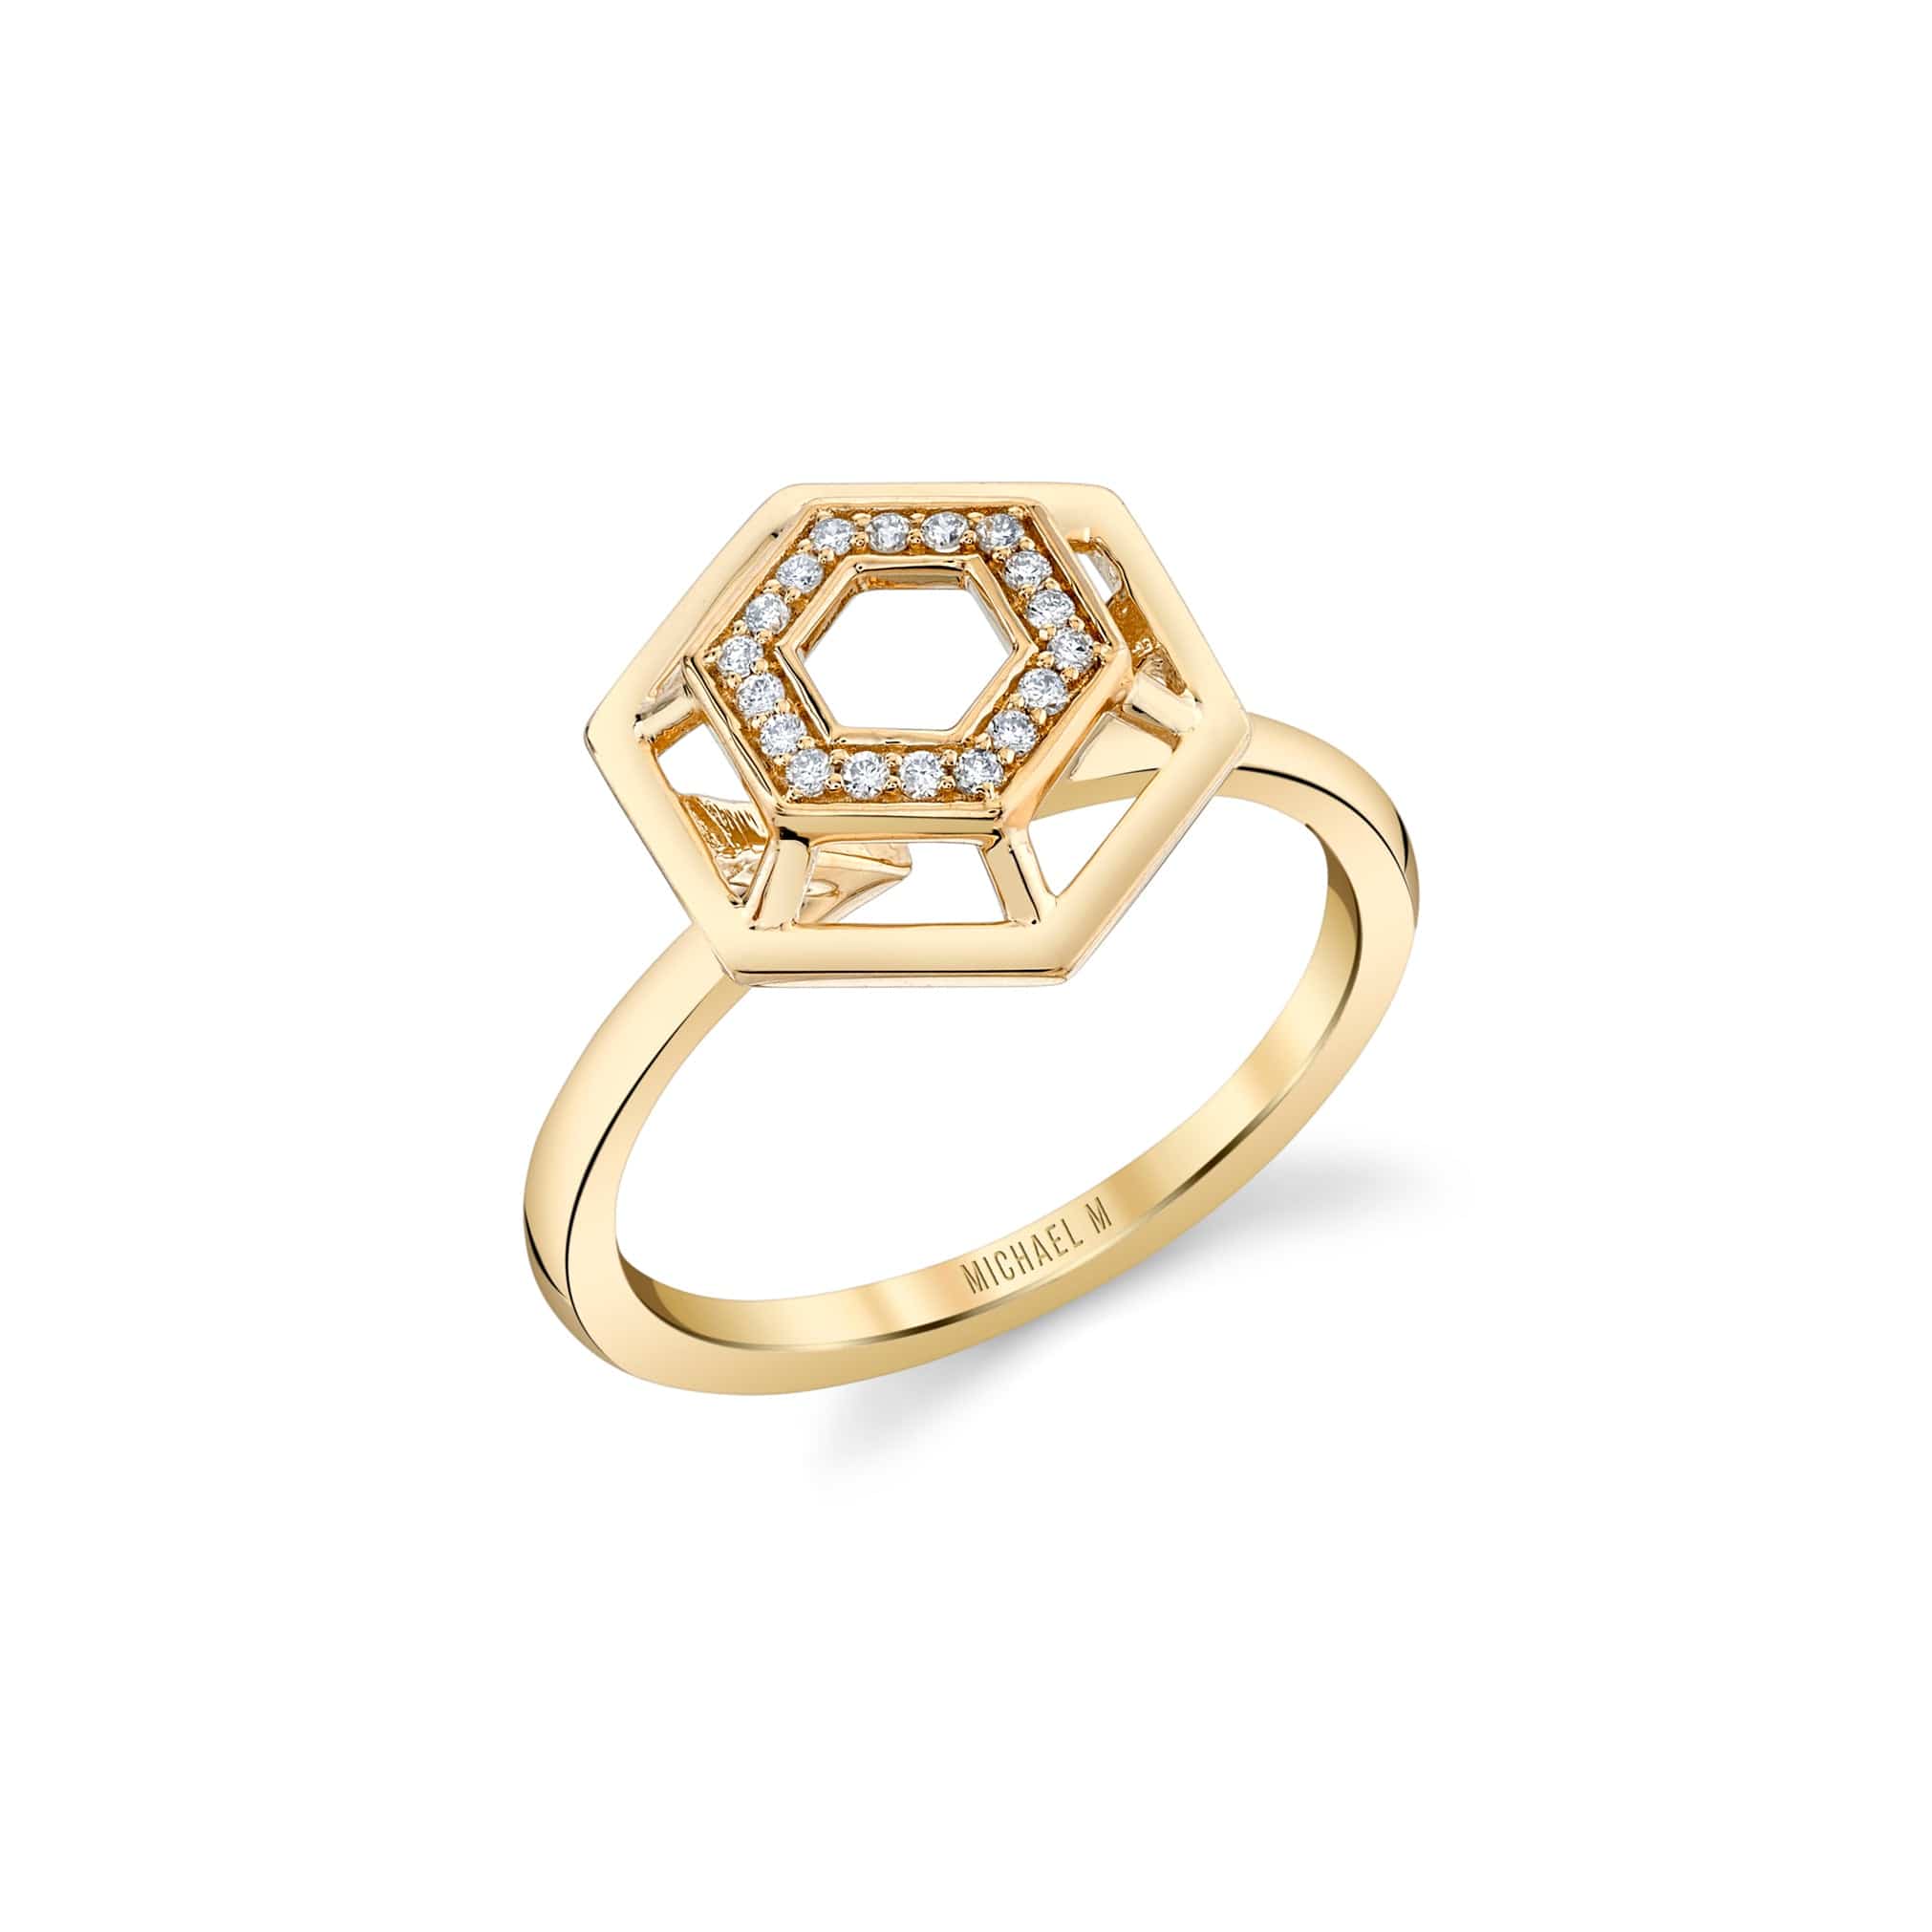 MICHAEL M Fashion Rings 14K Yellow Gold / 4 Hex Truss Cocktail Ring F513